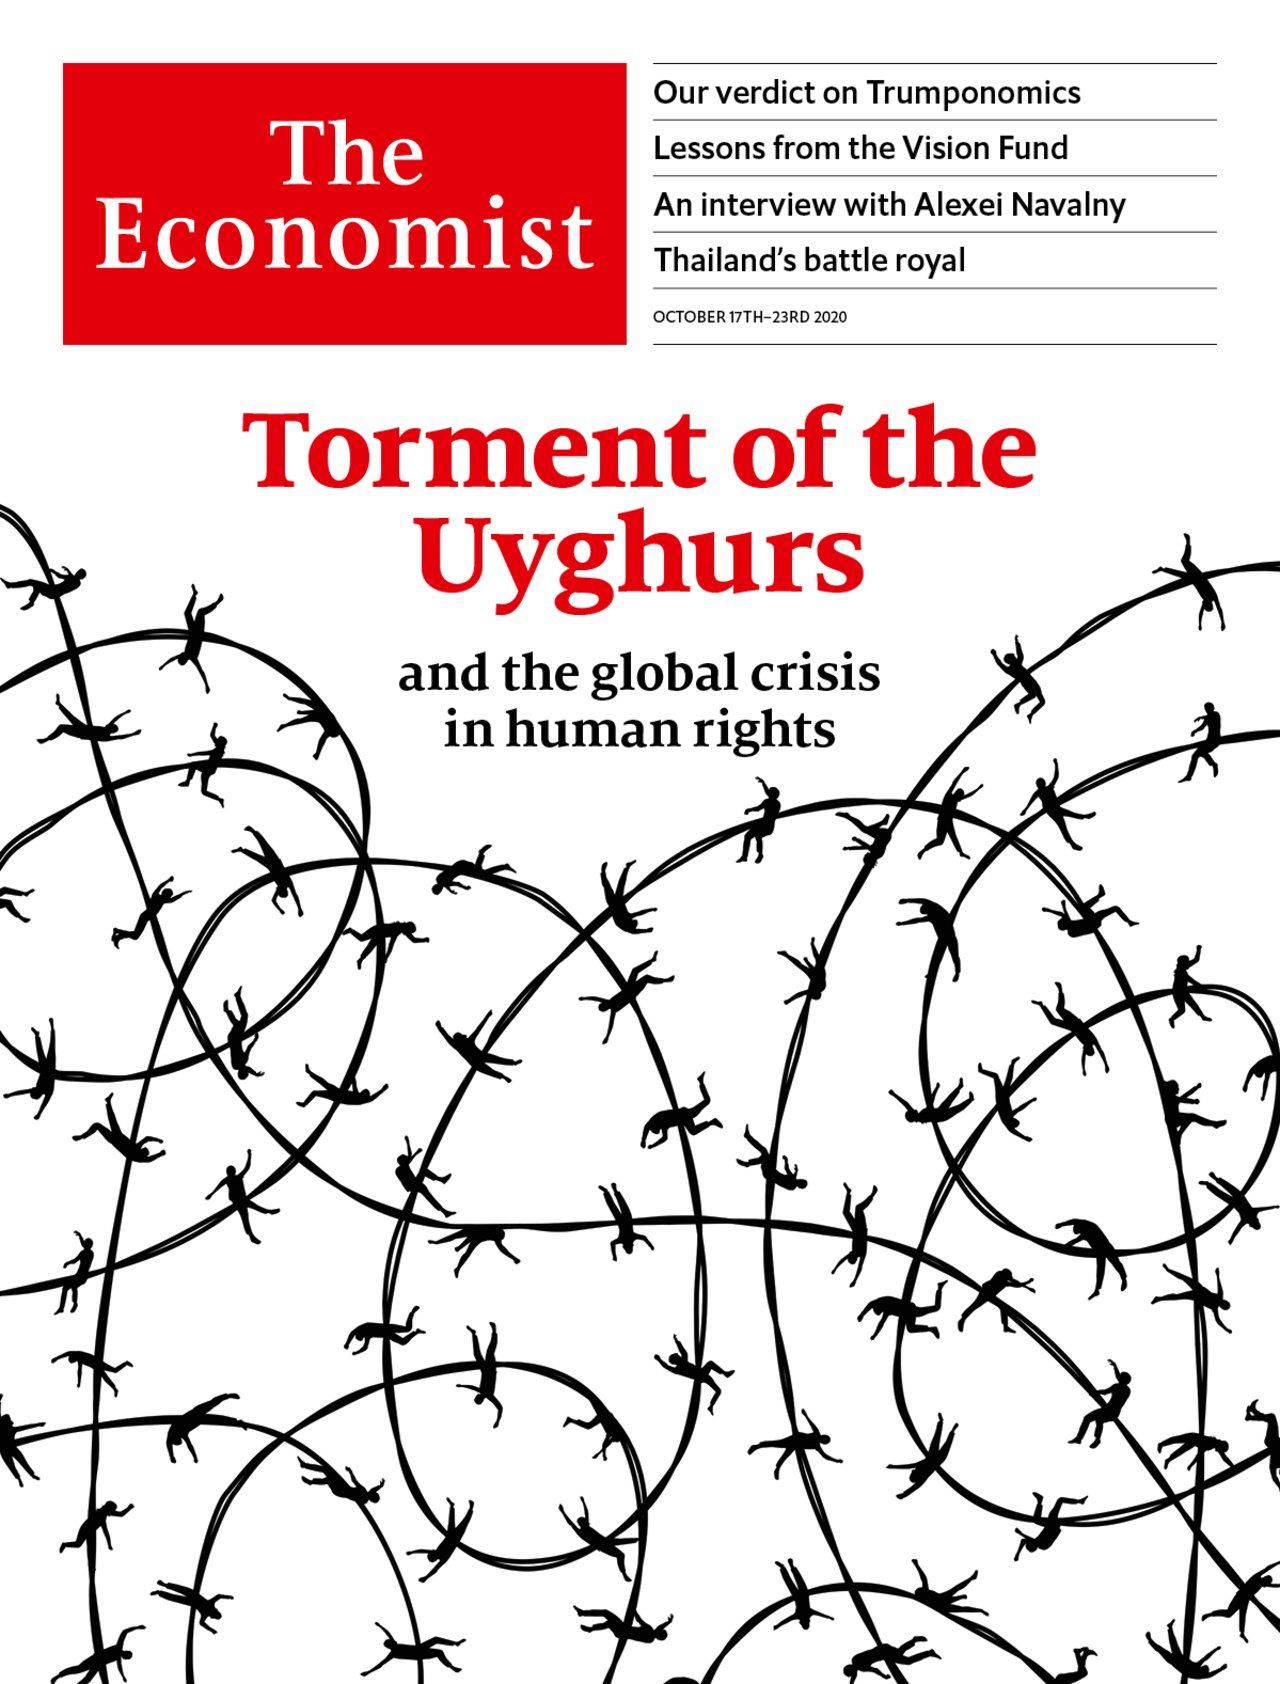 Torment of the Uyghurs and the global crisis in human rights